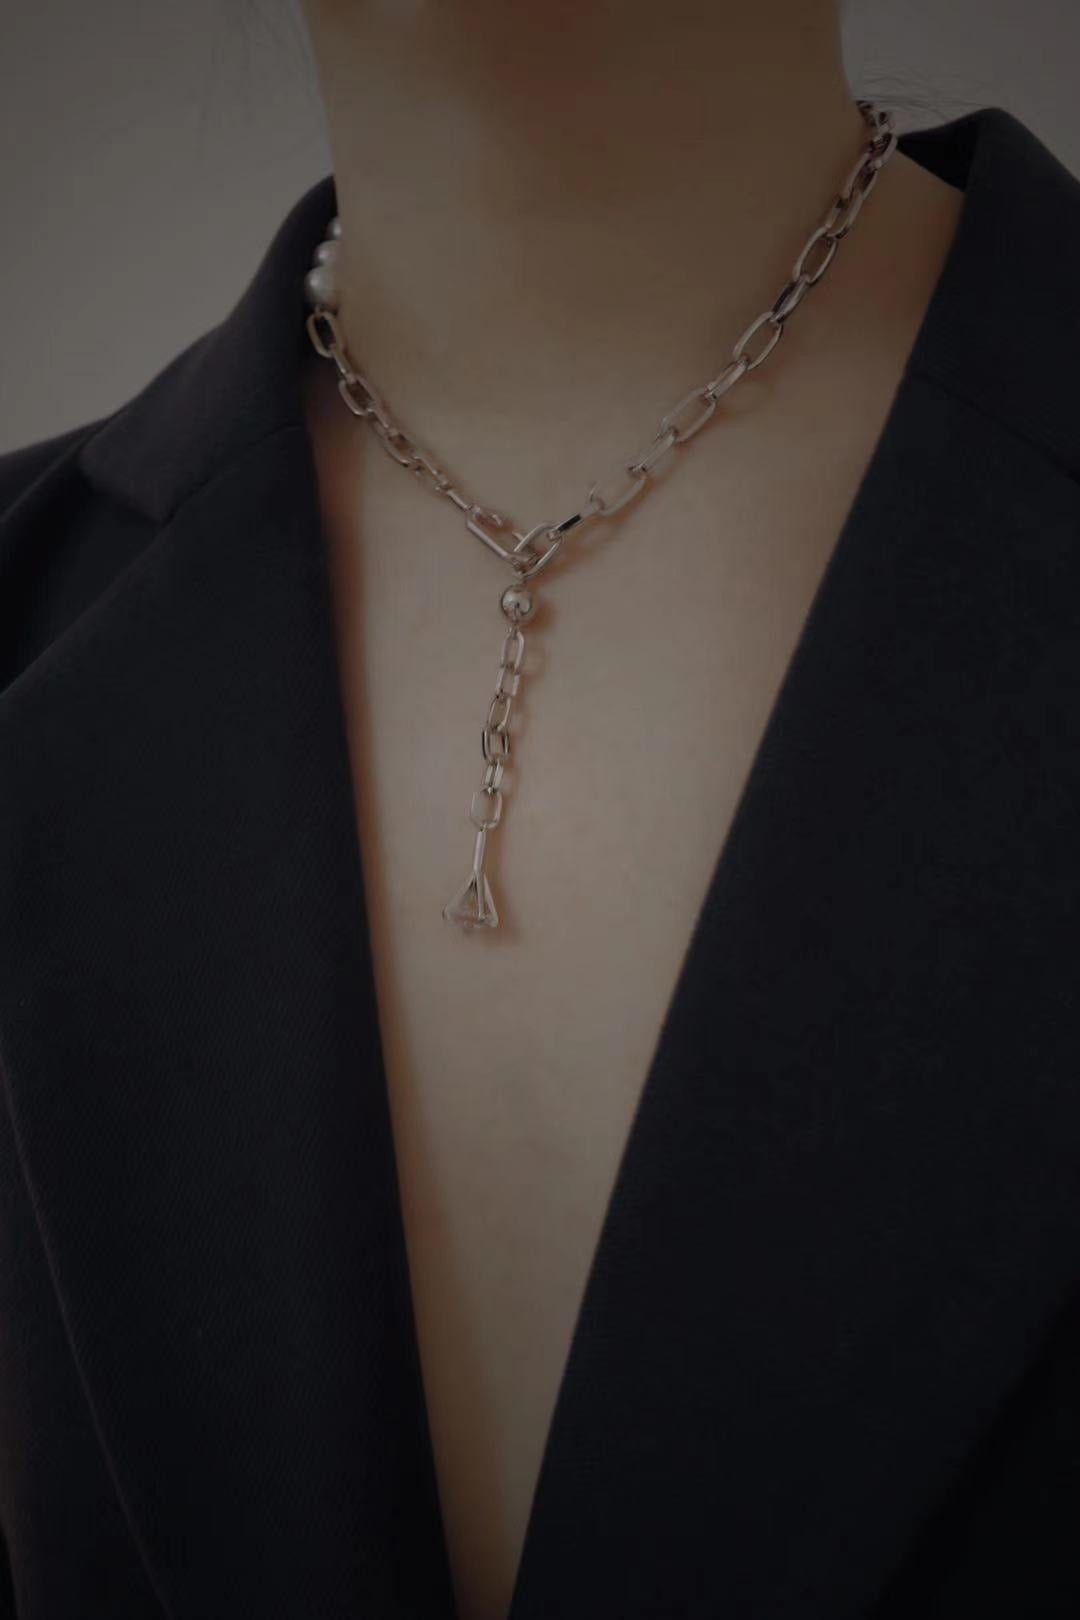 Pearl Chain Necklaace